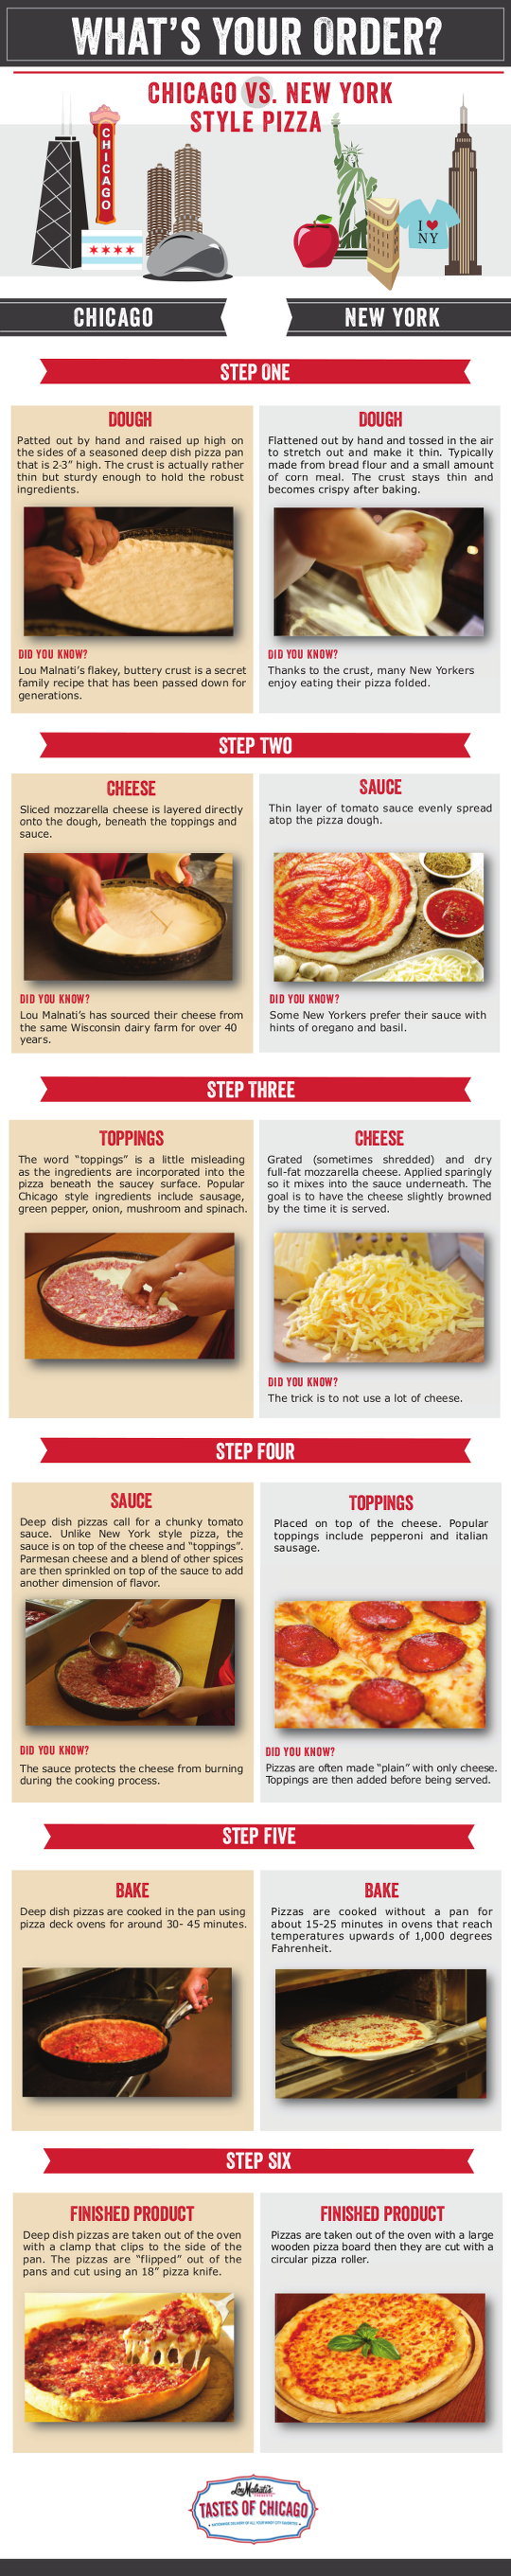 Chicago-Style Deep Dish Pizza vs New York-Style Thin Crust Pizza | Infographic